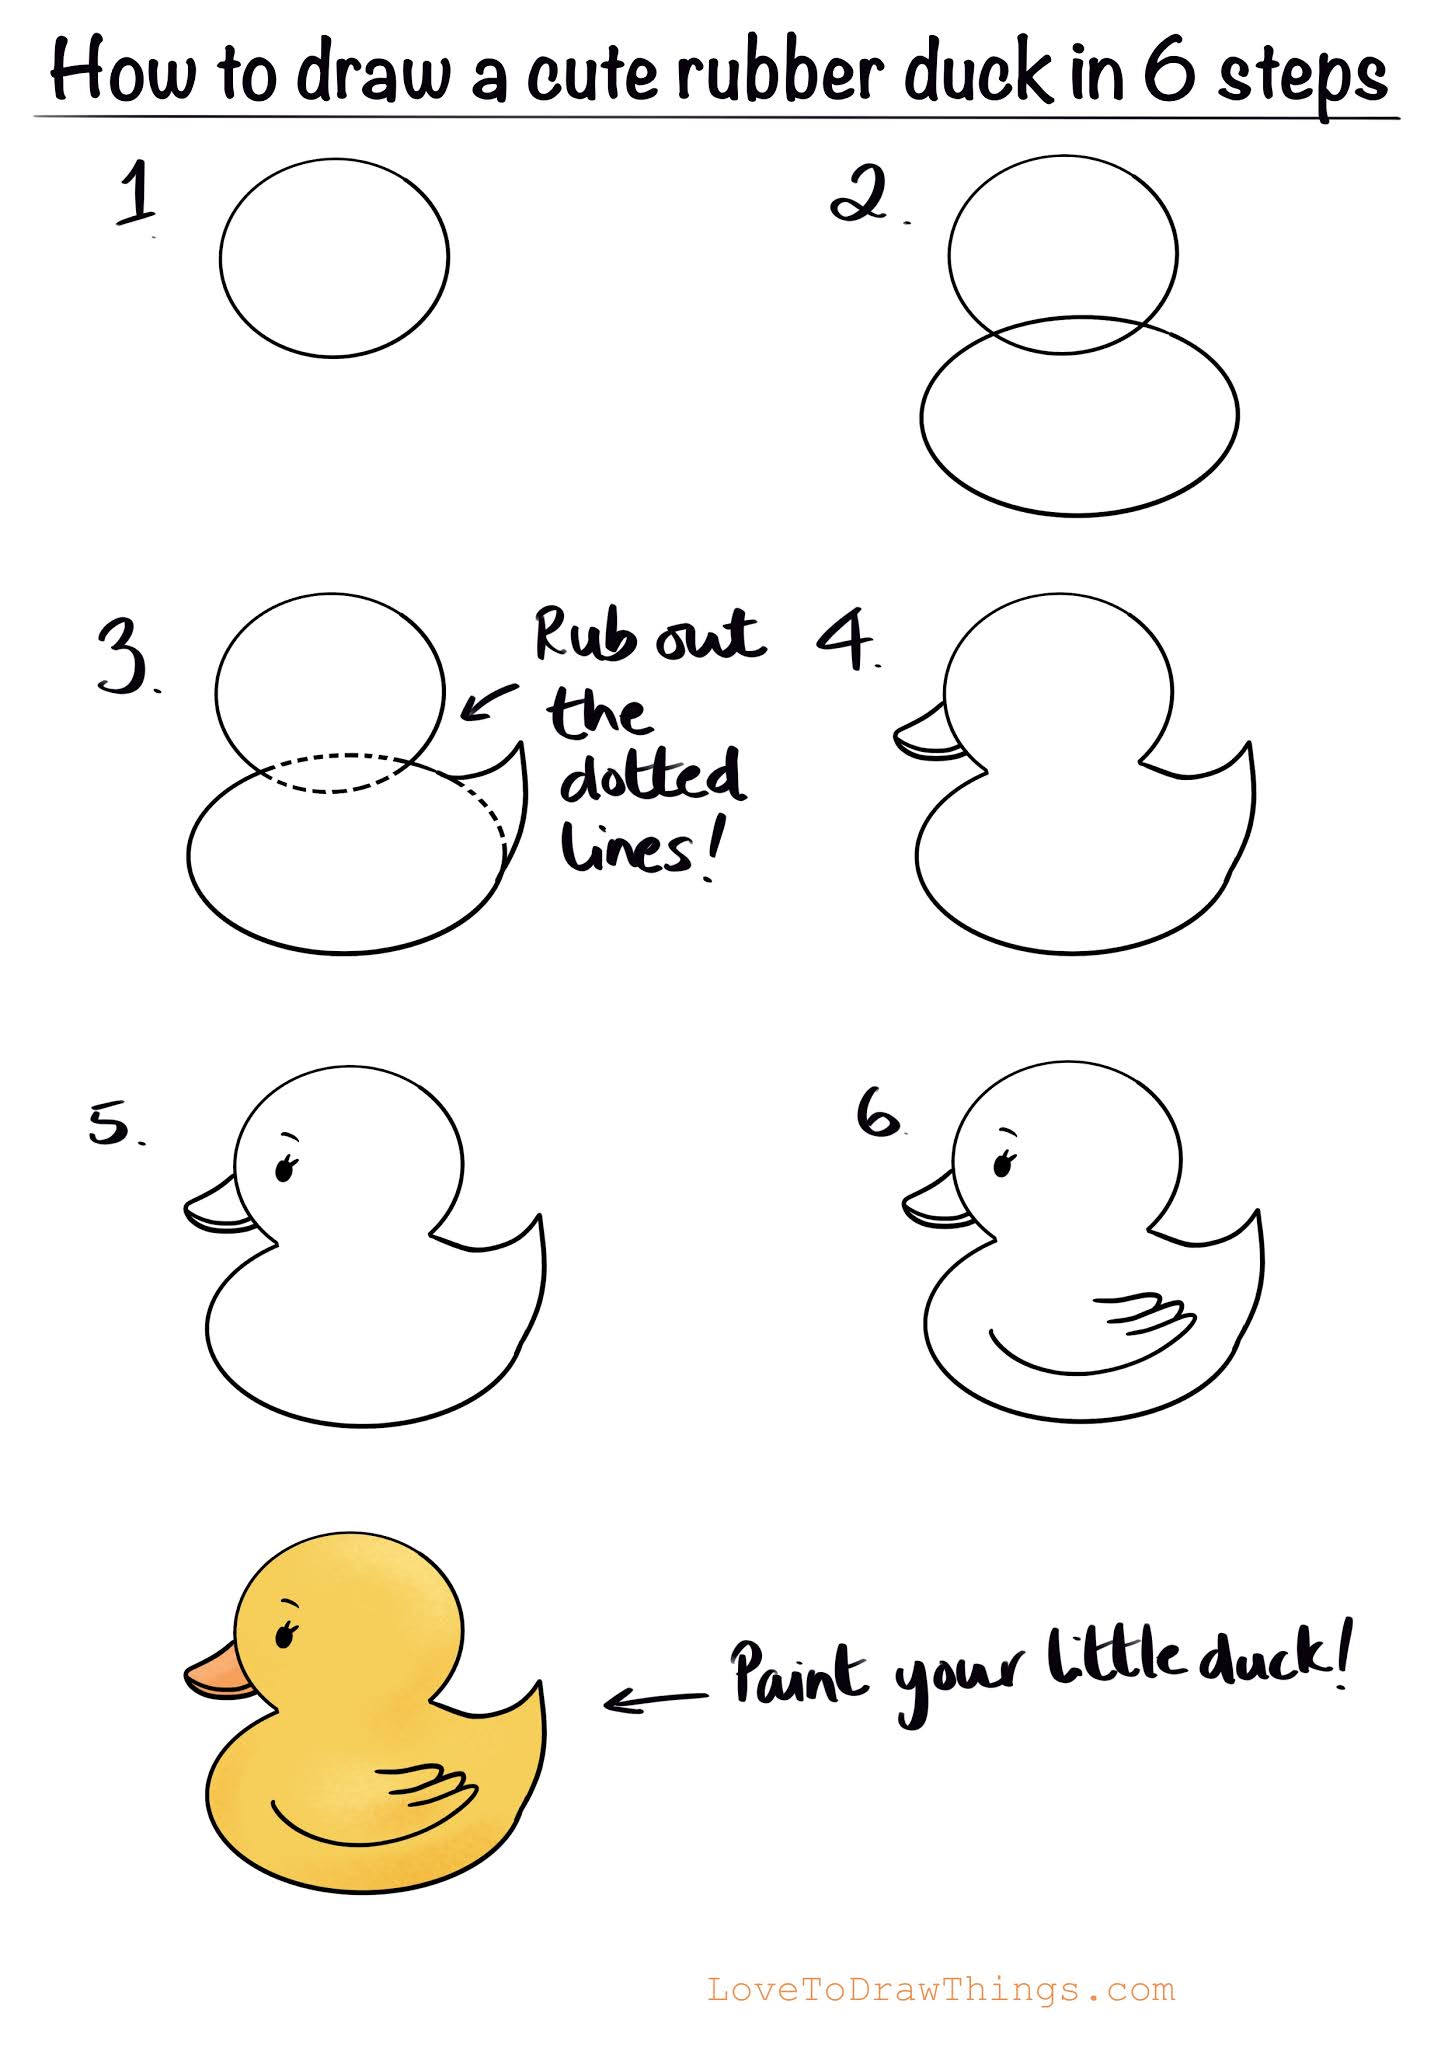 How To Draw A Cute Rubber Ducky - Hamu200